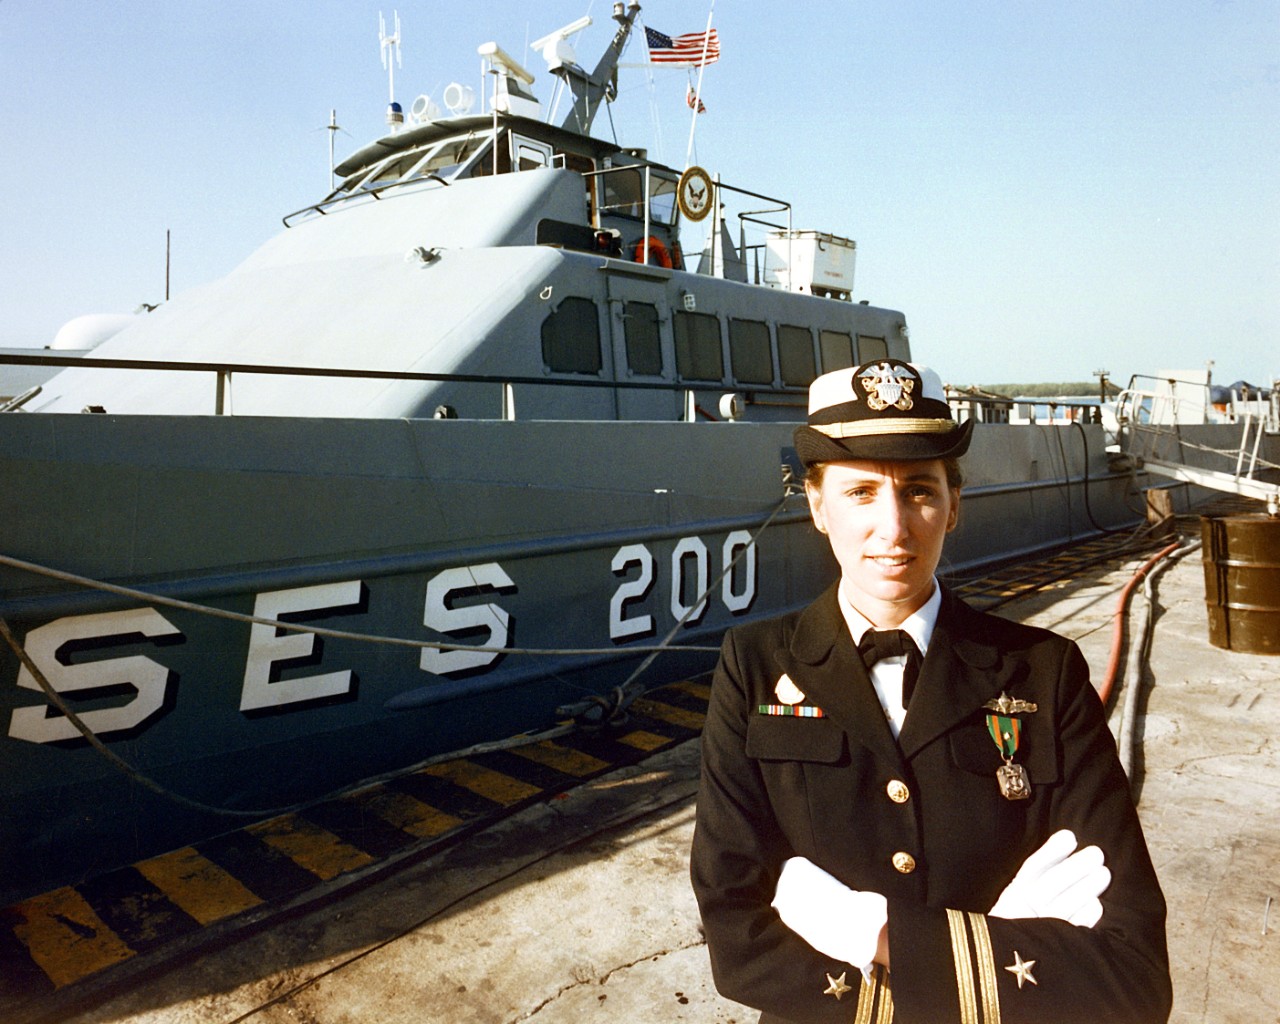 330-CFD-DN-SC-86-01059:   Lieutenant Maureen Farren, 1985.   Farren was Officer in Charge of surface effect ship, SES 200.   Photographed at Key West, Florida, November 21, 1985.   She is wearing the Navy Achievement Medal.   Farren would later be one of the first female commanding officers of a combatant U.S. Navy ship.    Official U.S. Navy photograph, now in the collections of the National Archives.  